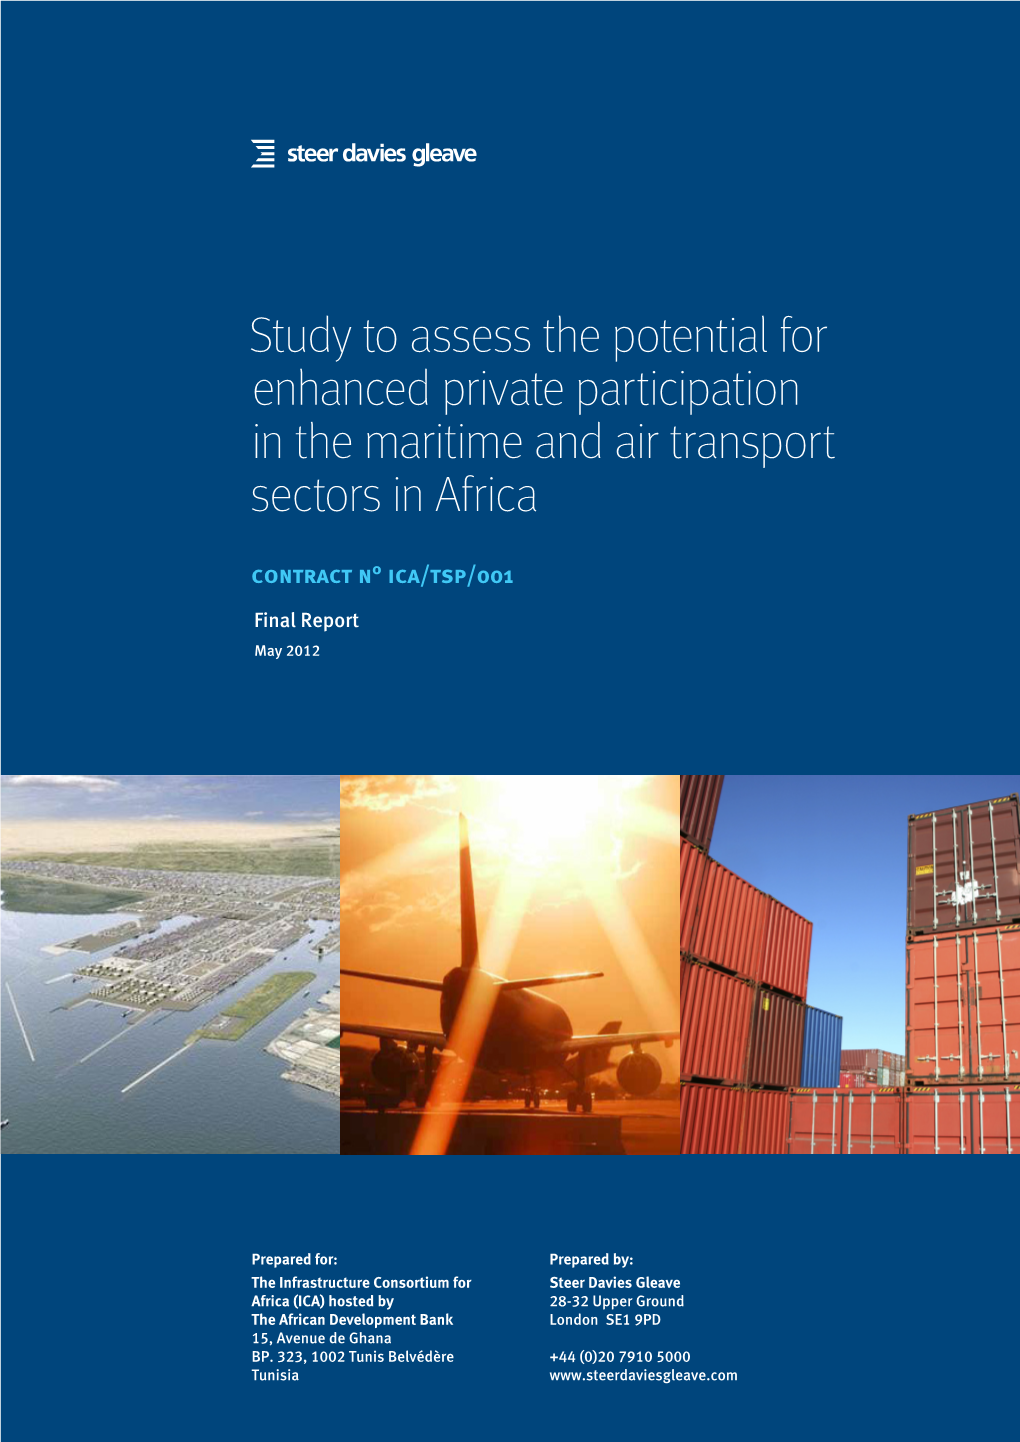 Study to Assess the Potential for Enhanced Private Participation in the Maritime and Air Transport Sectors in Africa Contract N° Ica/Tsp/001